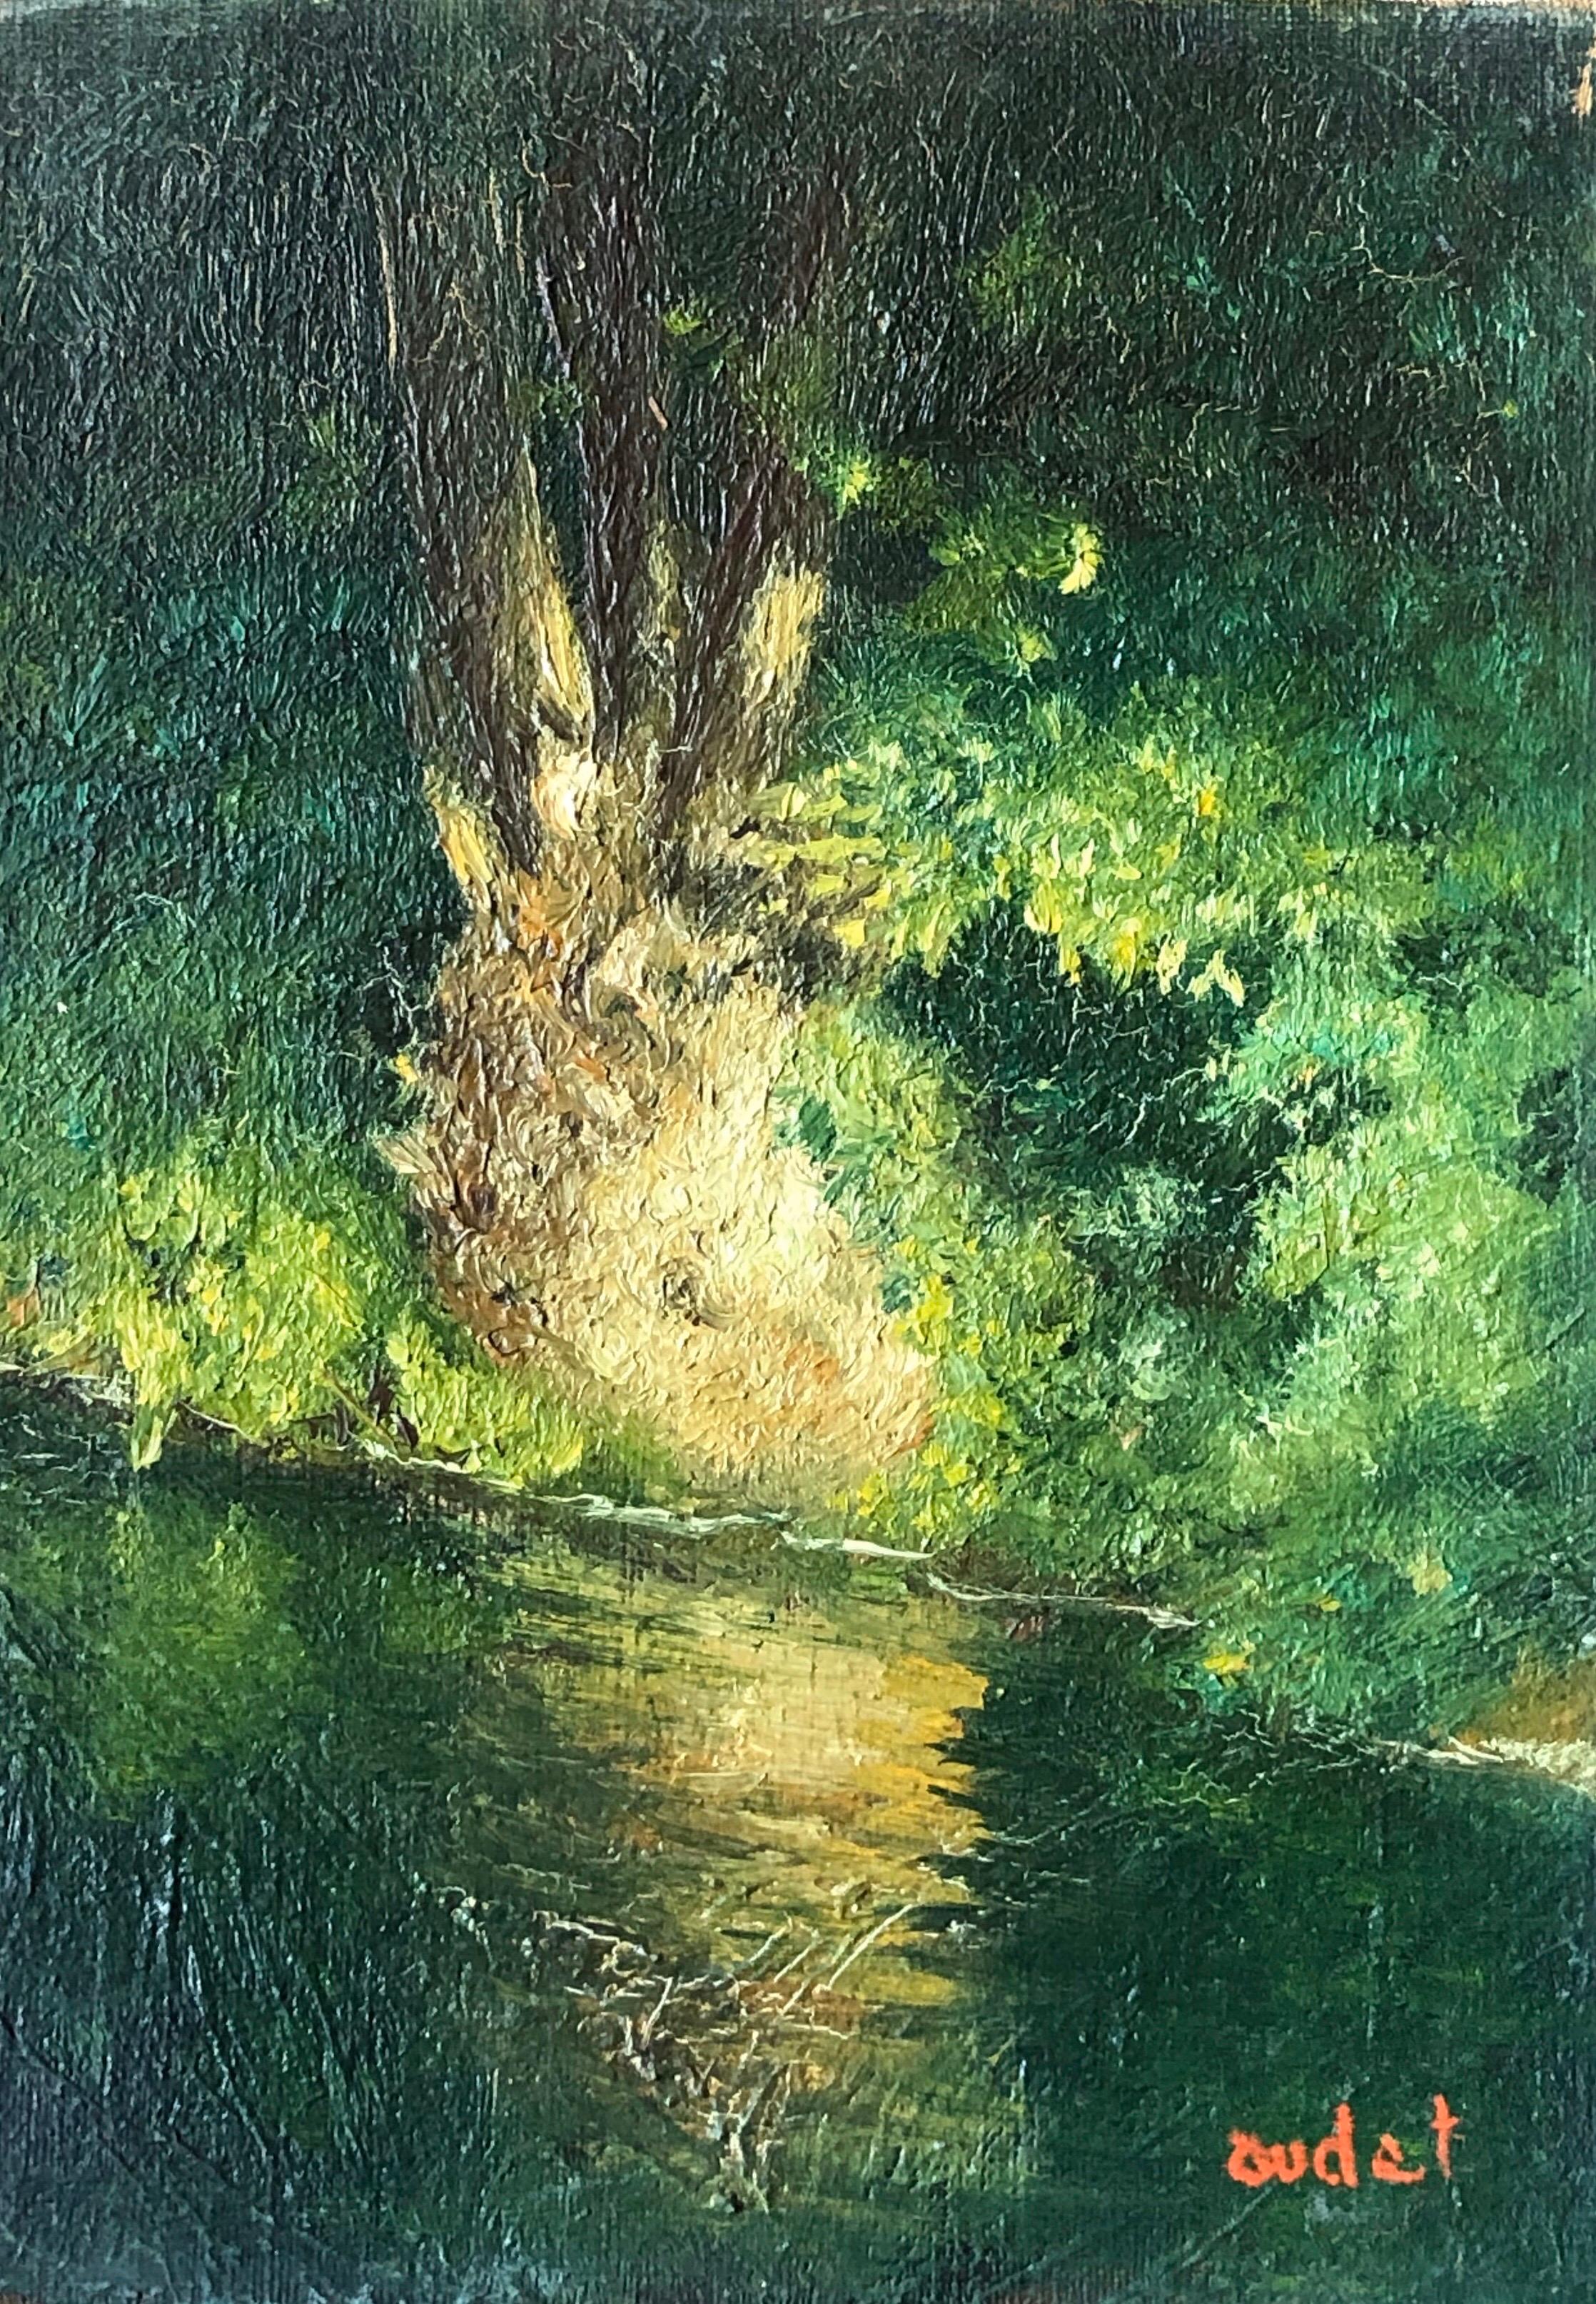 Fernand Audet Abstract Painting - Mid 20th Century French Impasto Oil Painting on Canvas Dappled Light River